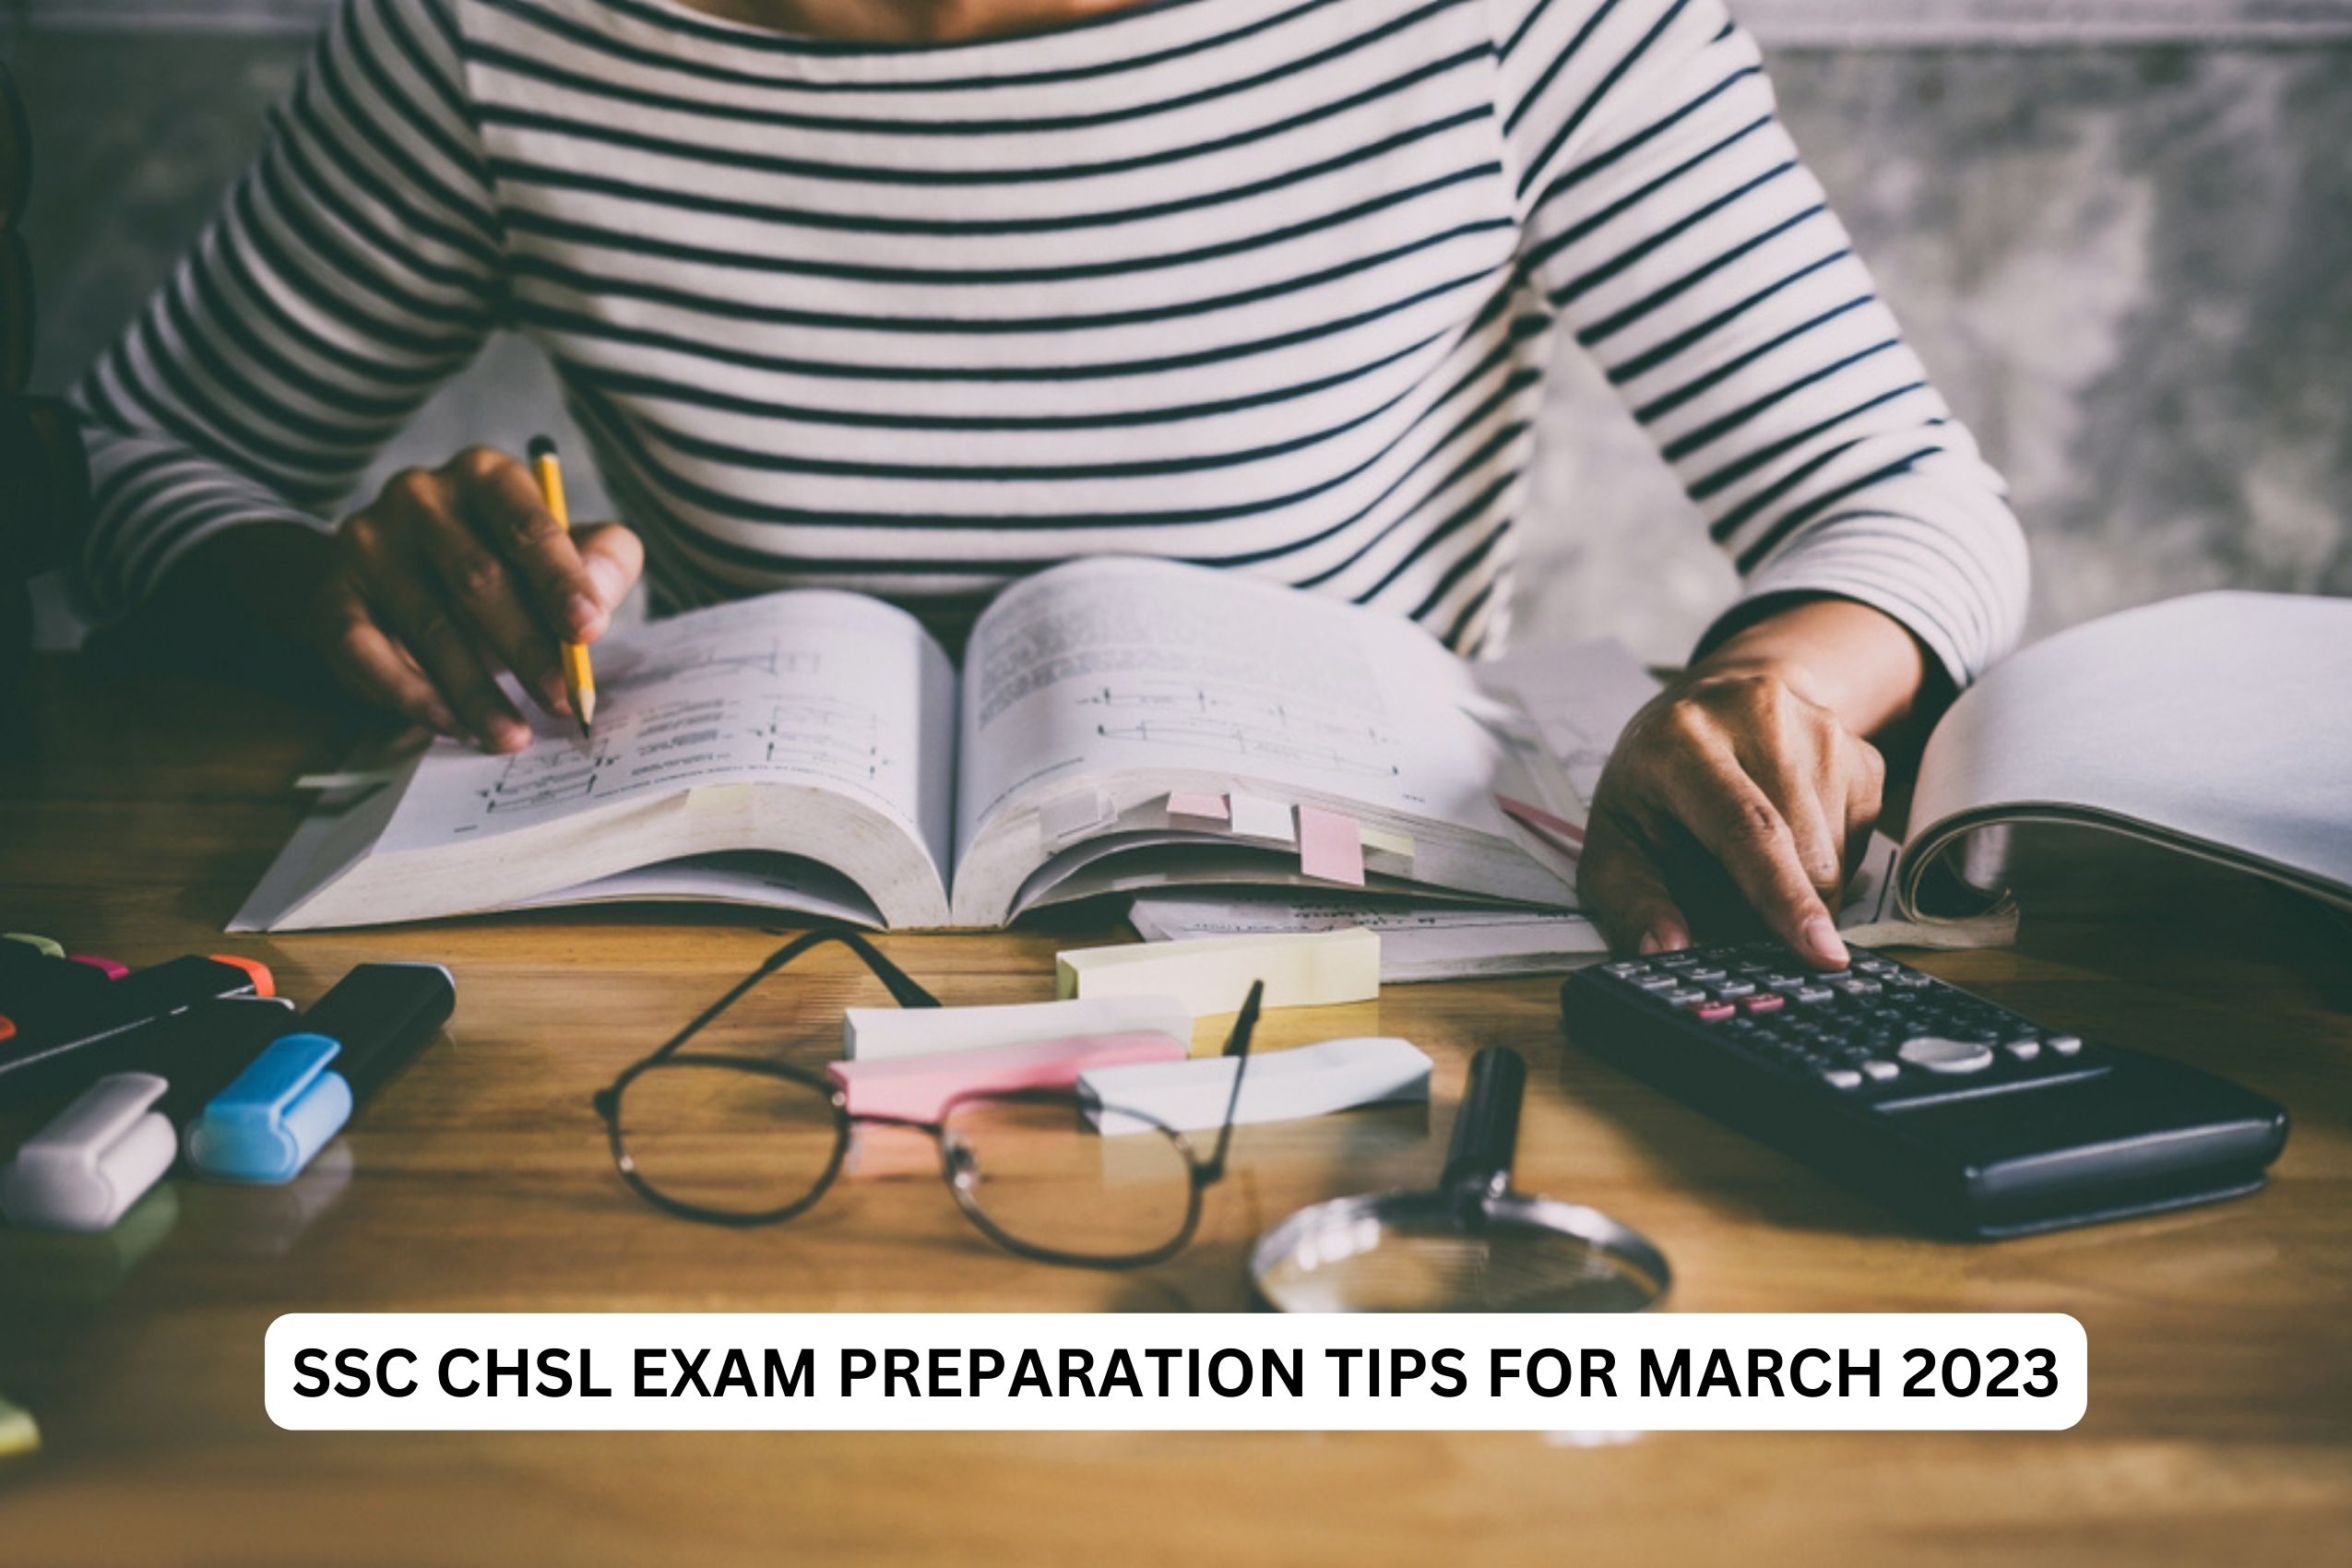 SSC CHSL Exam Preparation Tips for March 2023